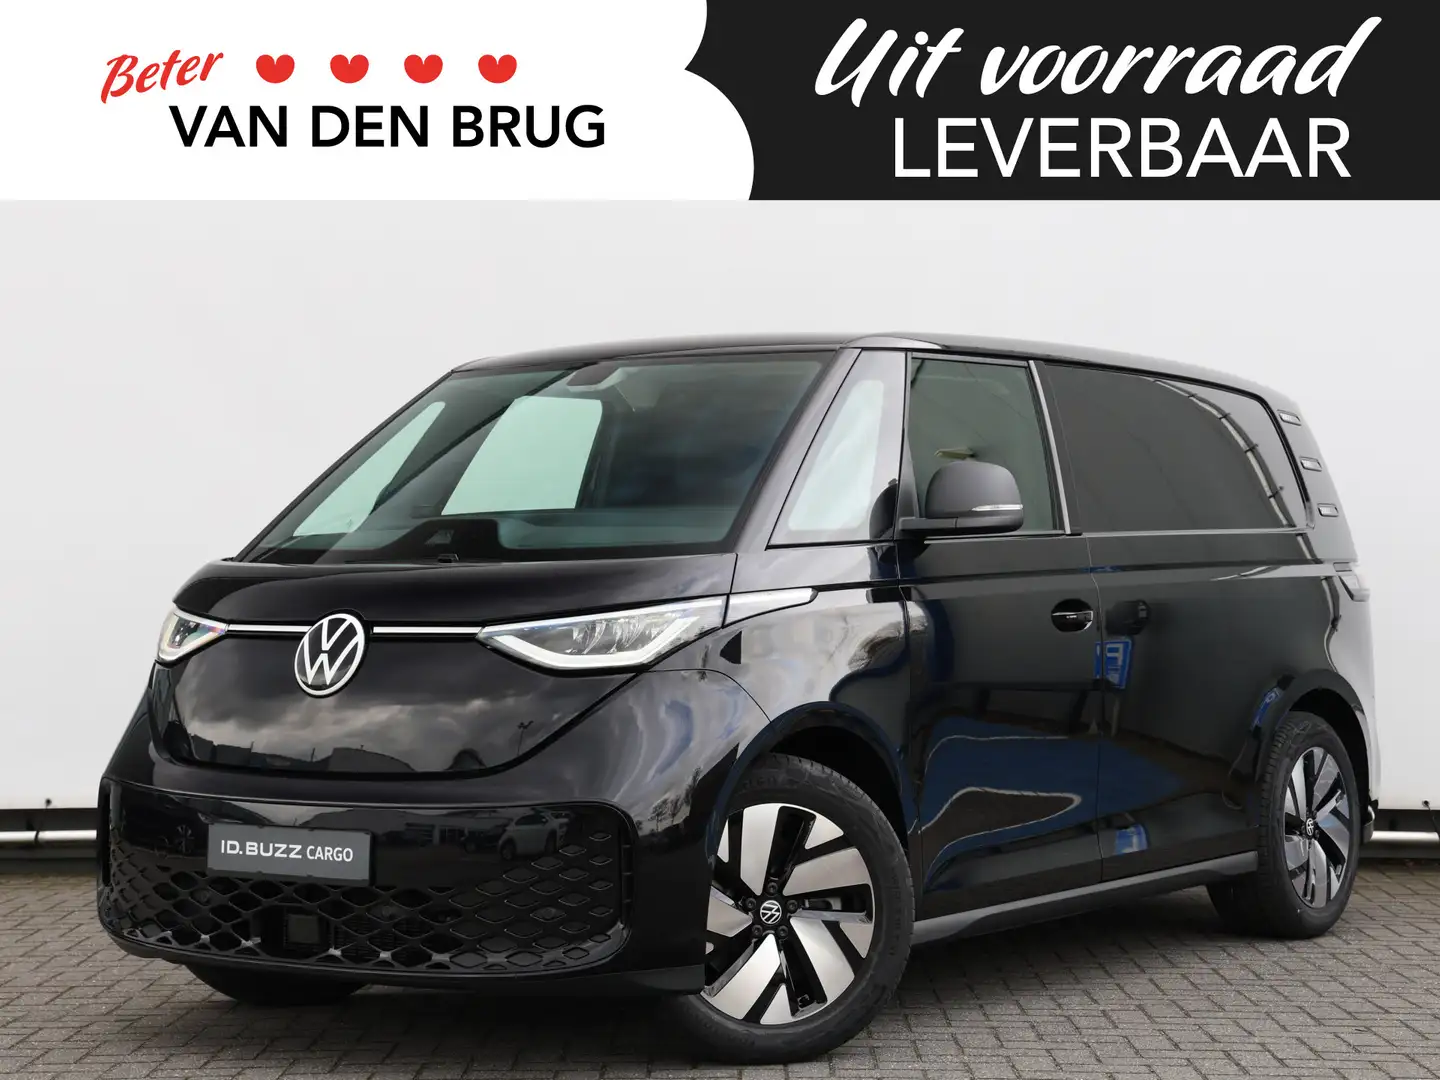 Volkswagen ID. Buzz Cargo ID.Buzz L1H1 77 kWh 204pk | ACC | LED | PDC | Navi crna - 1